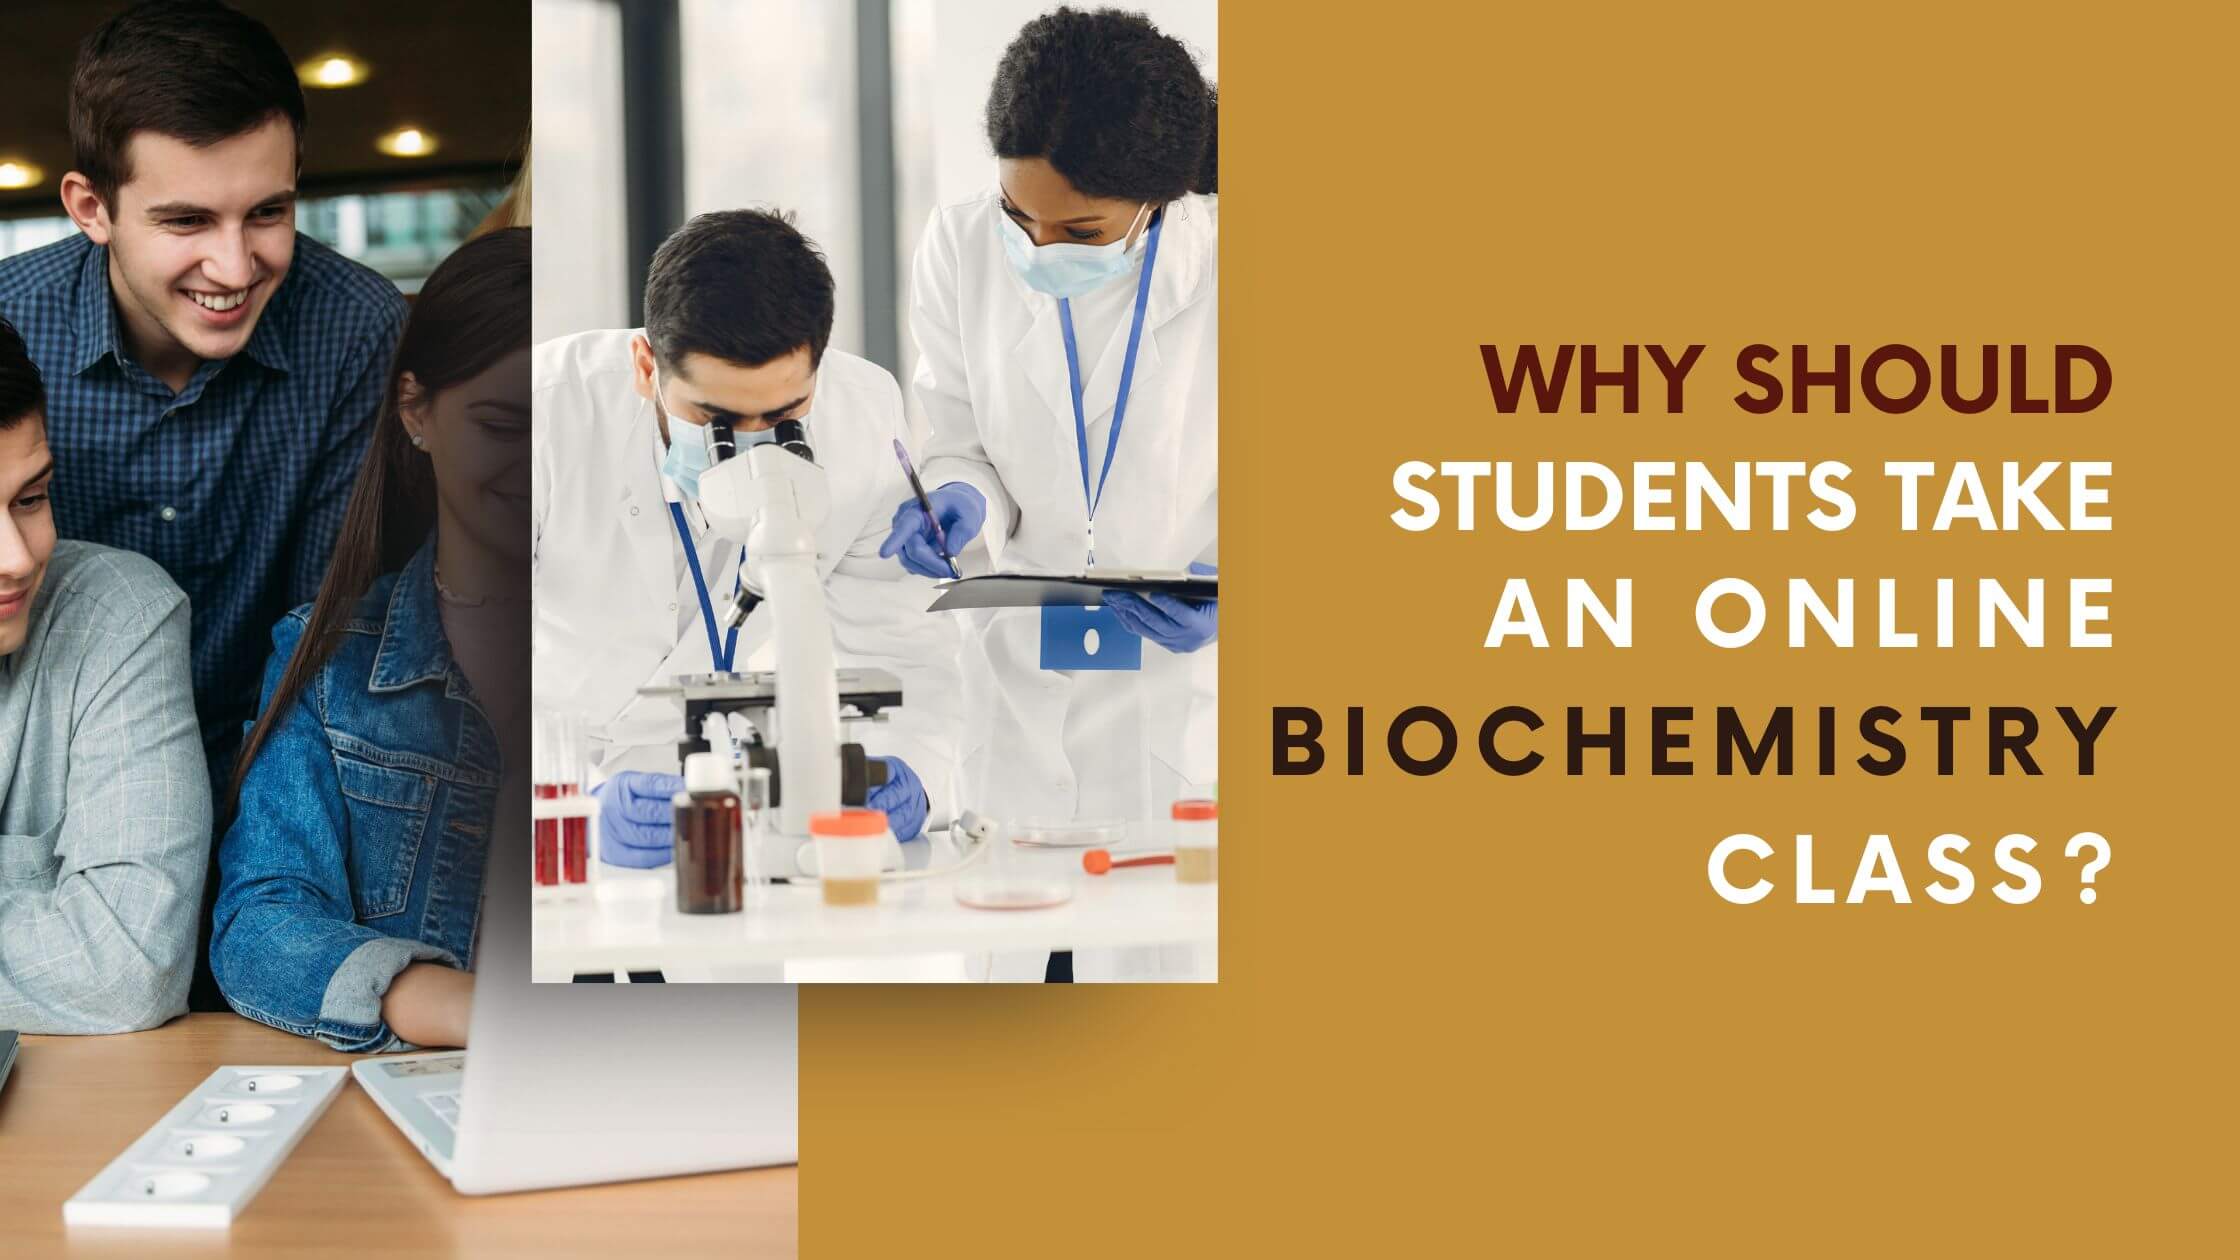 Why should students take an online biochemistry class